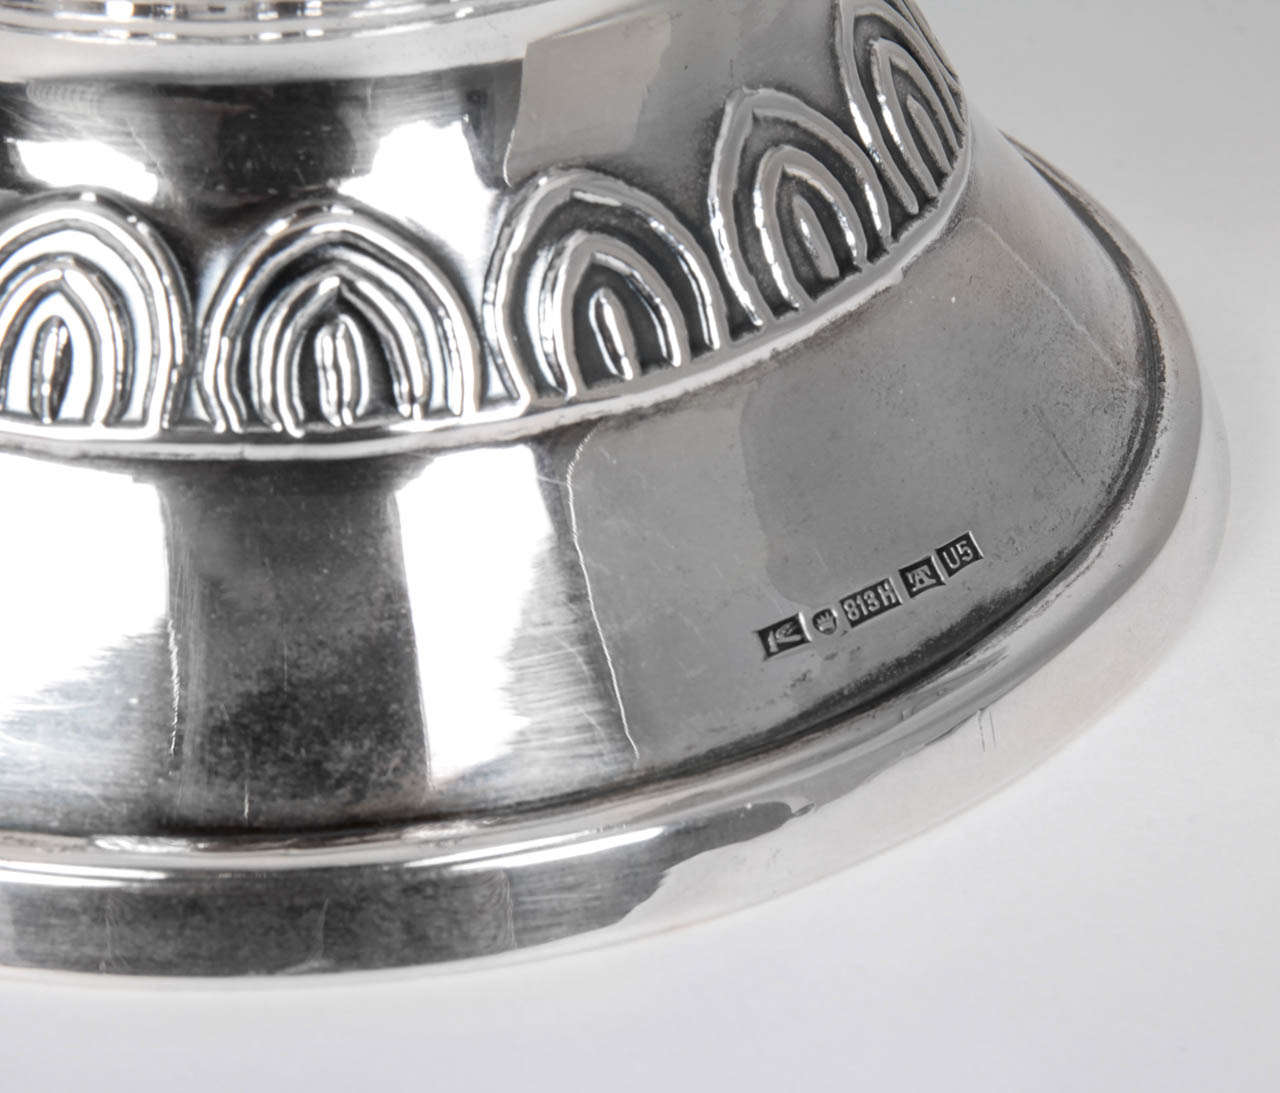 Scandinavian Modern / Art Deco Finnish Silver Presentation Bowl 1925 In Excellent Condition For Sale In New York, NY